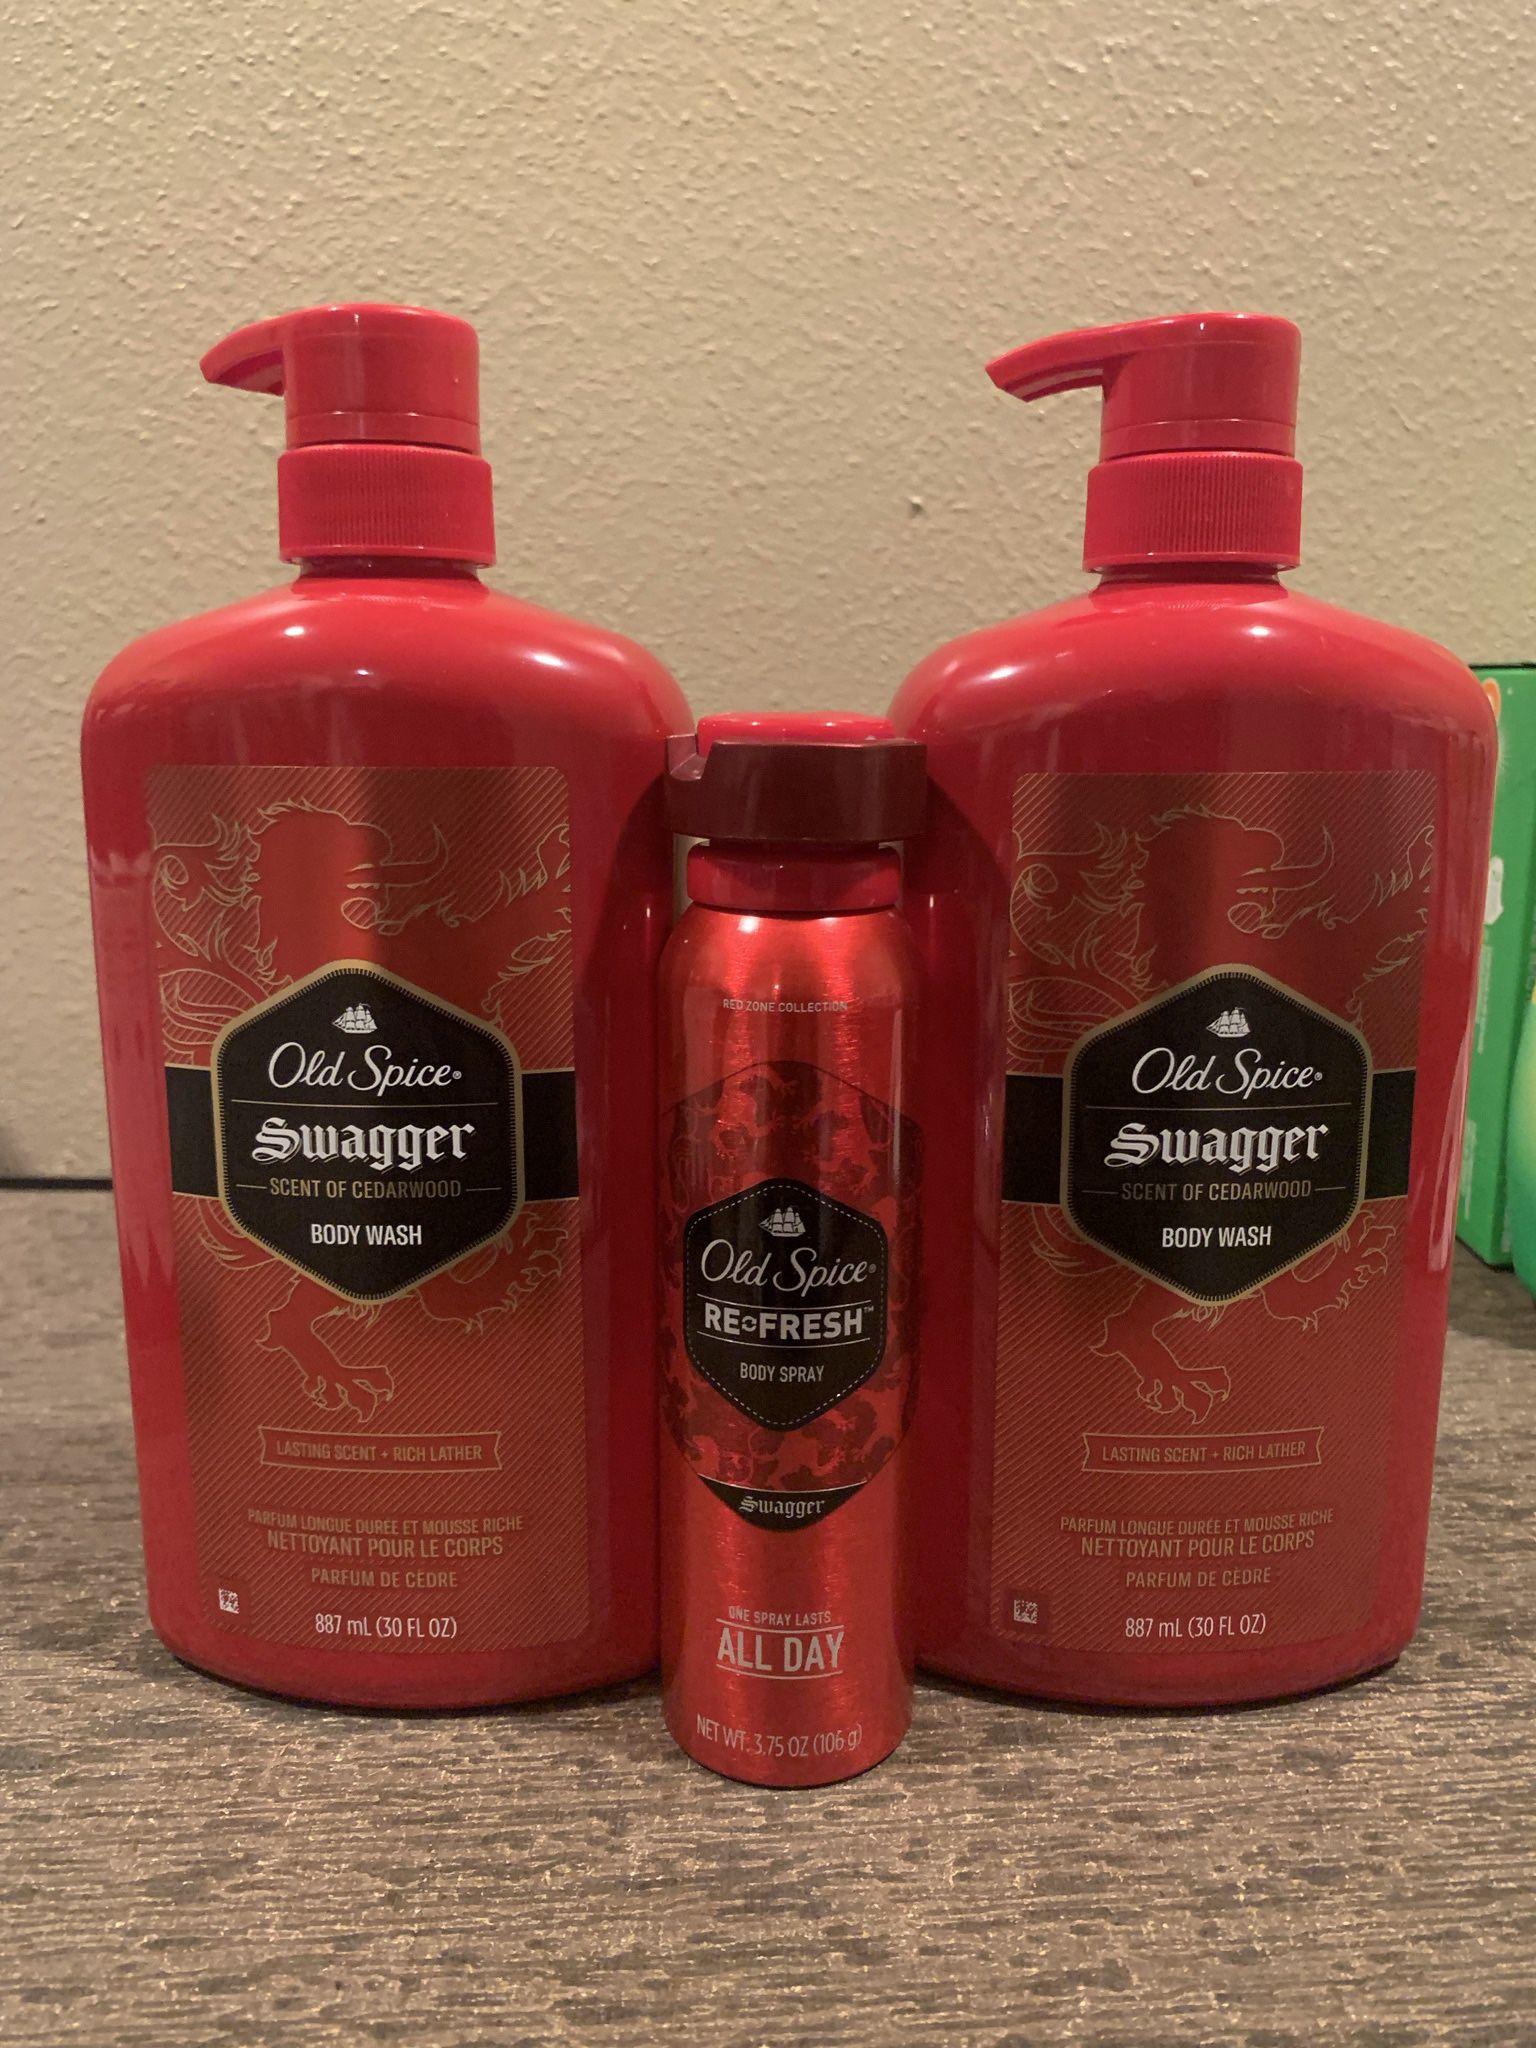 Old Spice SwAgger Bundle $20 